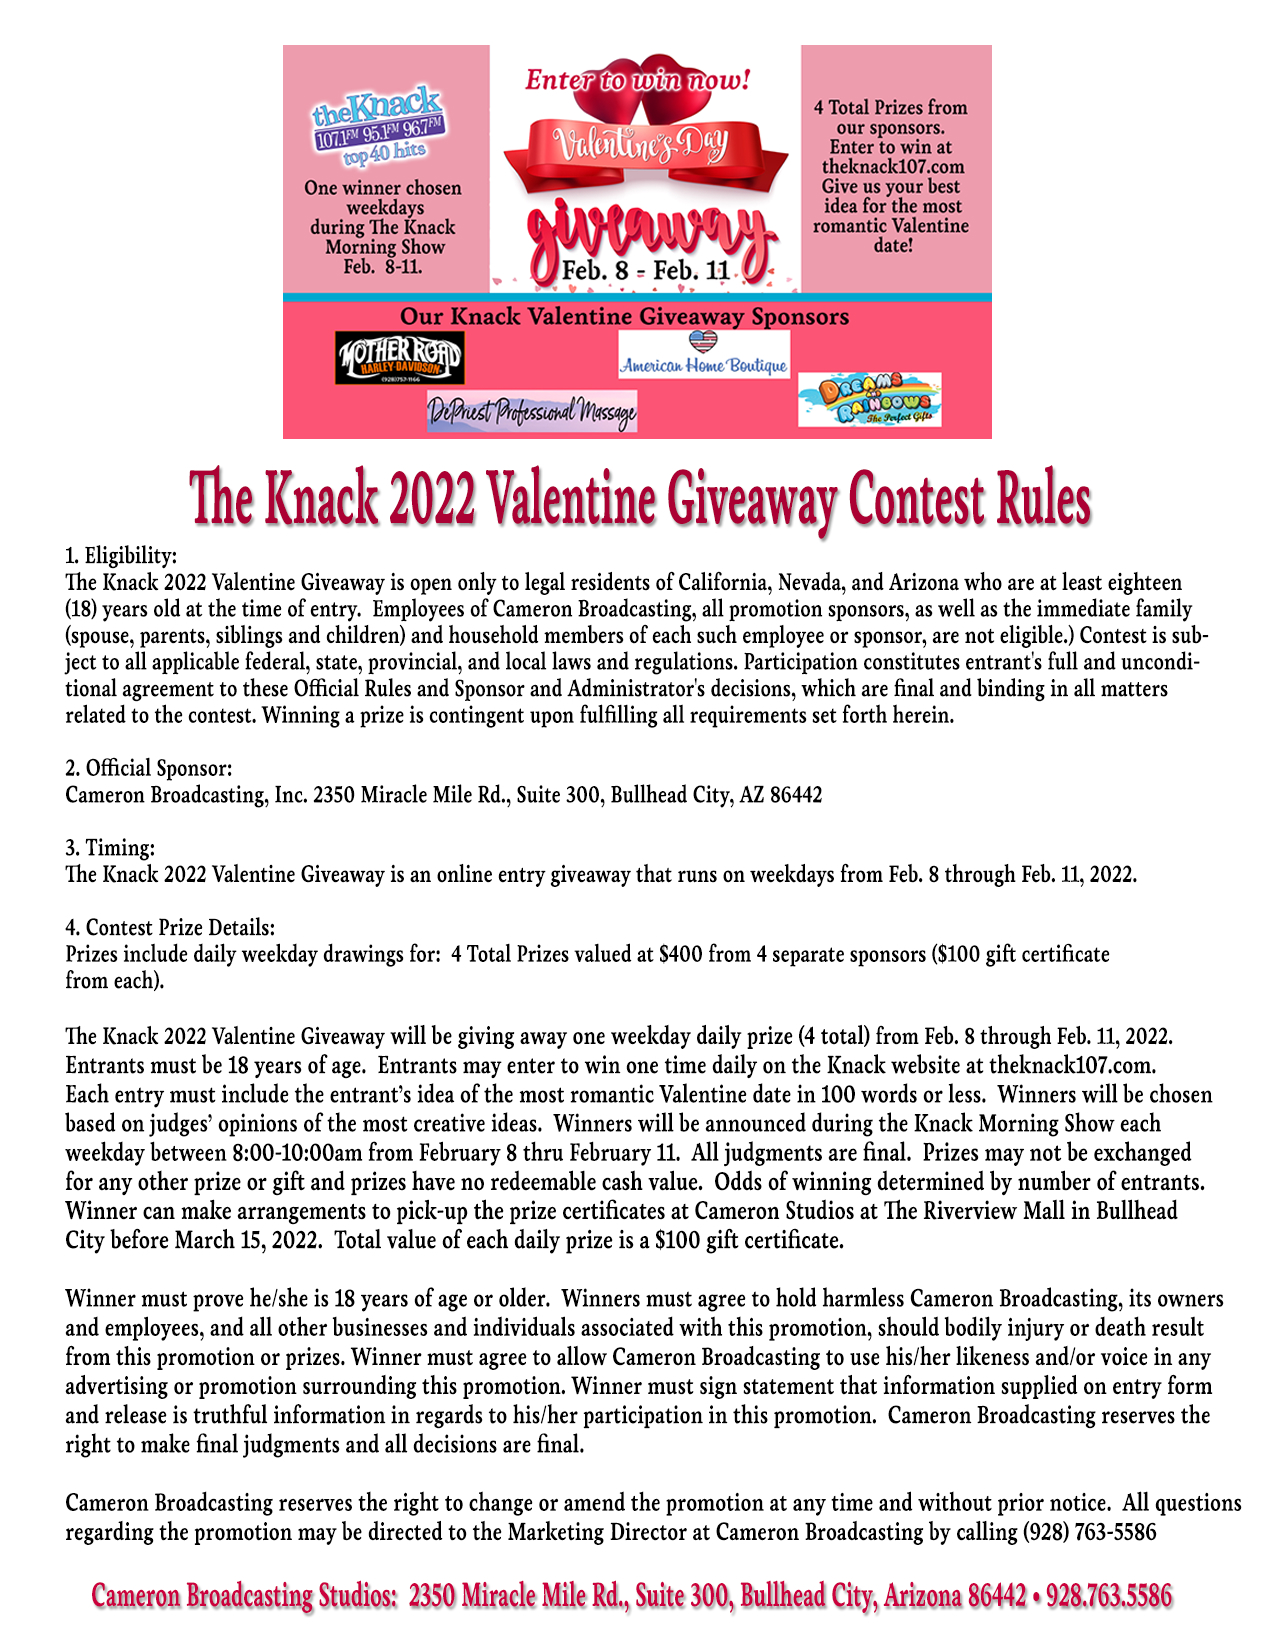 The Knack 2022 Valentine Giveaway Contest Rules